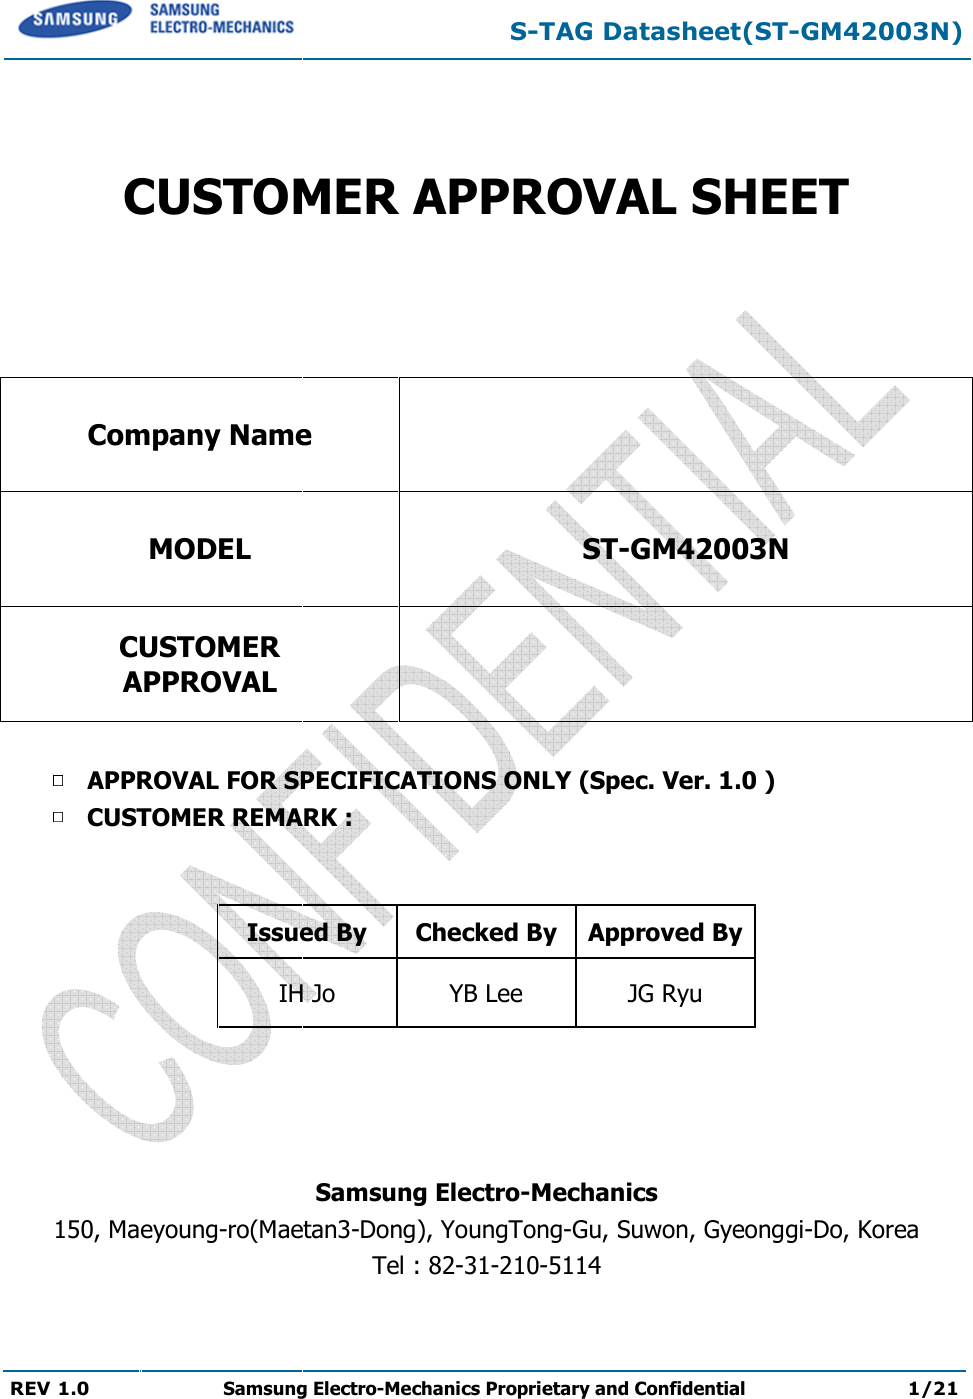  REV 1.0 Samsung Electro  CUSTOMER APPROVAL SHEETCompany NameMODEL CUSTOMER APPROVAL APPROVAL FOR SPECIFICATIONS ONLY (Spec. Ver. CUSTOMER REMARK :   Issued ByIH Jo    150, Maeyoung-ro(Maetan S-TAG Datasheet(STSamsung Electro-Mechanics Proprietary and Confidential  CUSTOMER APPROVAL SHEET  Company Name  ST-GM4200  APPROVAL FOR SPECIFICATIONS ONLY (Spec. Ver. 1.CUSTOMER REMARK : Issued By  Checked By Approved ByIH Jo  YB Lee  JG Ryu Samsung Electro-Mechanics Maetan3-Dong), YoungTong-Gu, Suwon, GyeonTel : 82-31-210-5114 TAG Datasheet(ST-GM42003N) Proprietary and Confidential 1/21 CUSTOMER APPROVAL SHEET 003N 1.0 ) Approved By eonggi-Do, Korea  